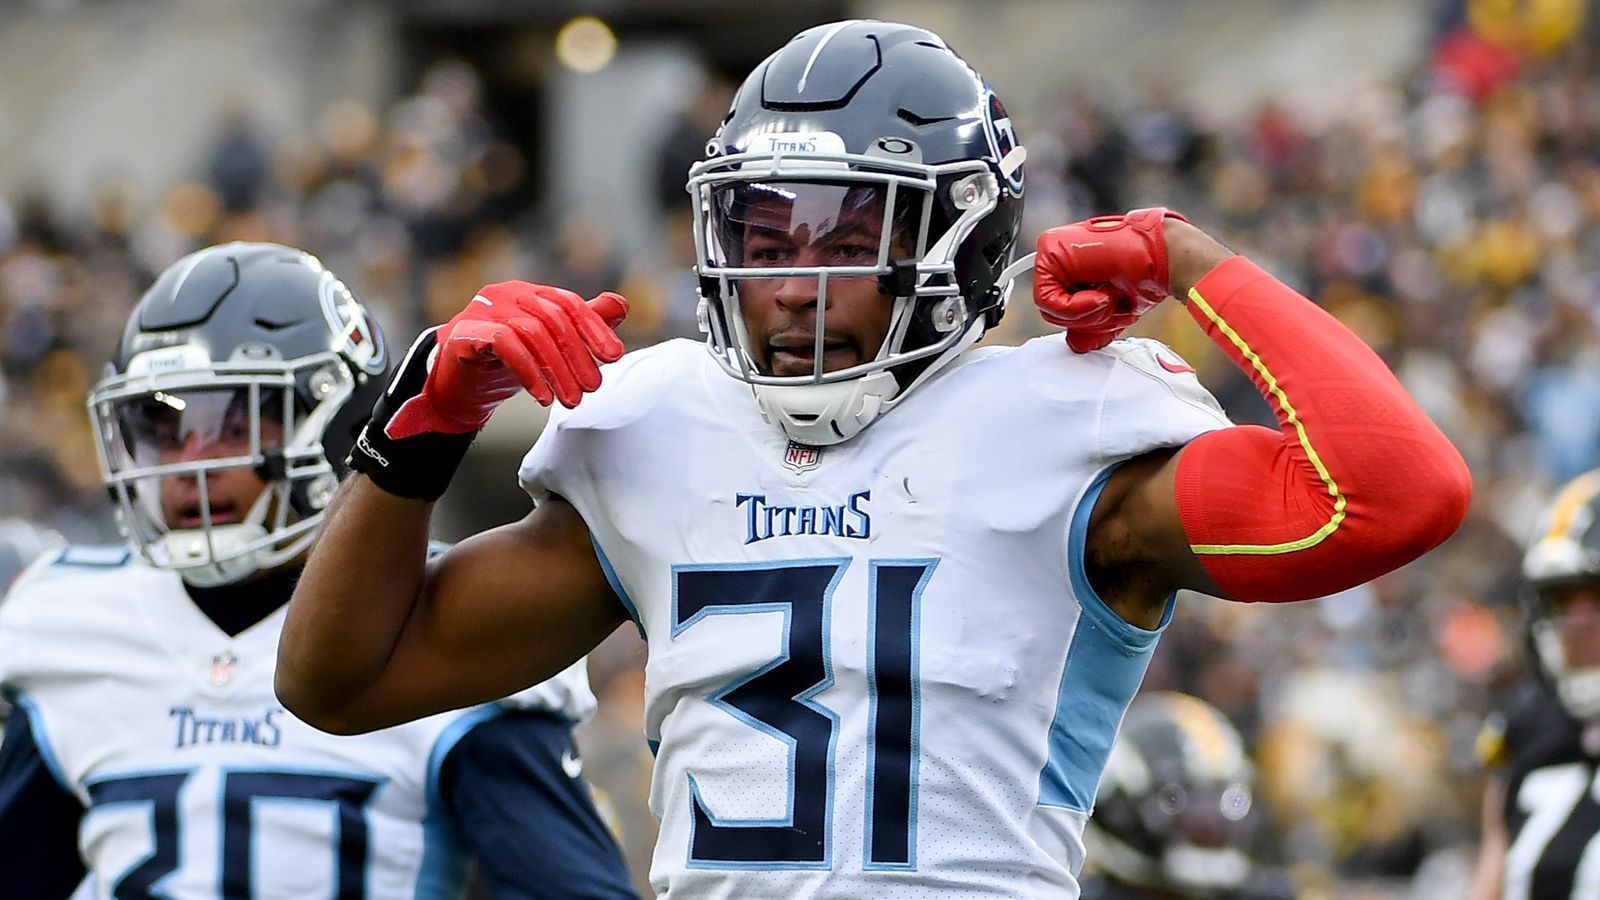 
                <strong>Platz 3 (geteilt): Kevin Byard</strong><br>
                &#x2022; Team: Tennessee Titans<br>&#x2022; Position: Free Safety<br>&#x2022; <strong>Overall Rating: 92</strong><br>&#x2022; Beste Key Stats: Awareness: 92 - Stamina: 94 - Zone Coverage: 93<br>
              